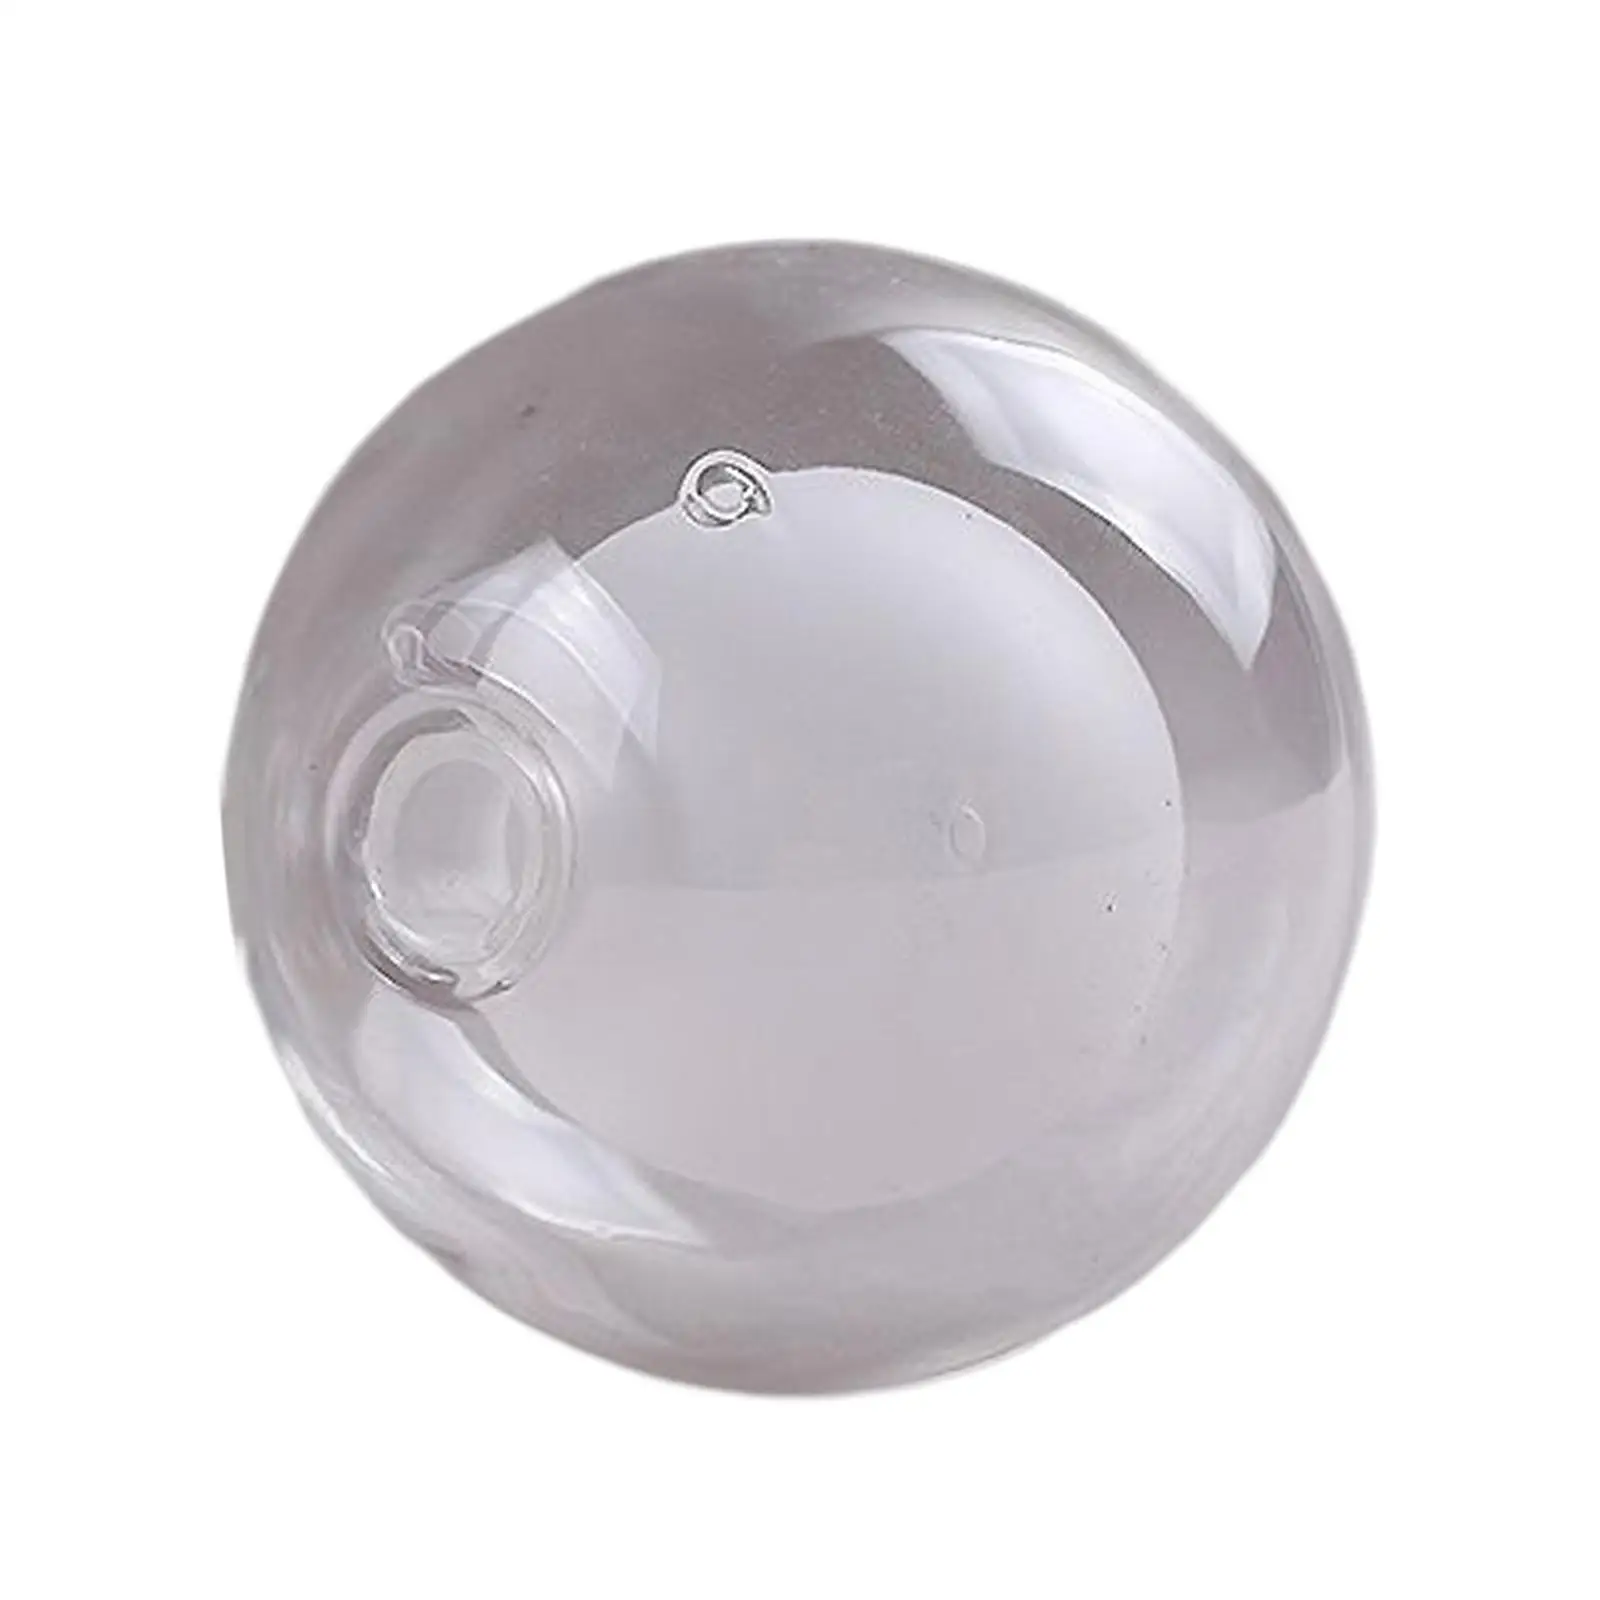 Glass Globe Lamp Shade Ceiling Light Fixture Hanging Decorative Replacement Lampshade Cover for Bedside Pendant Light Ornament